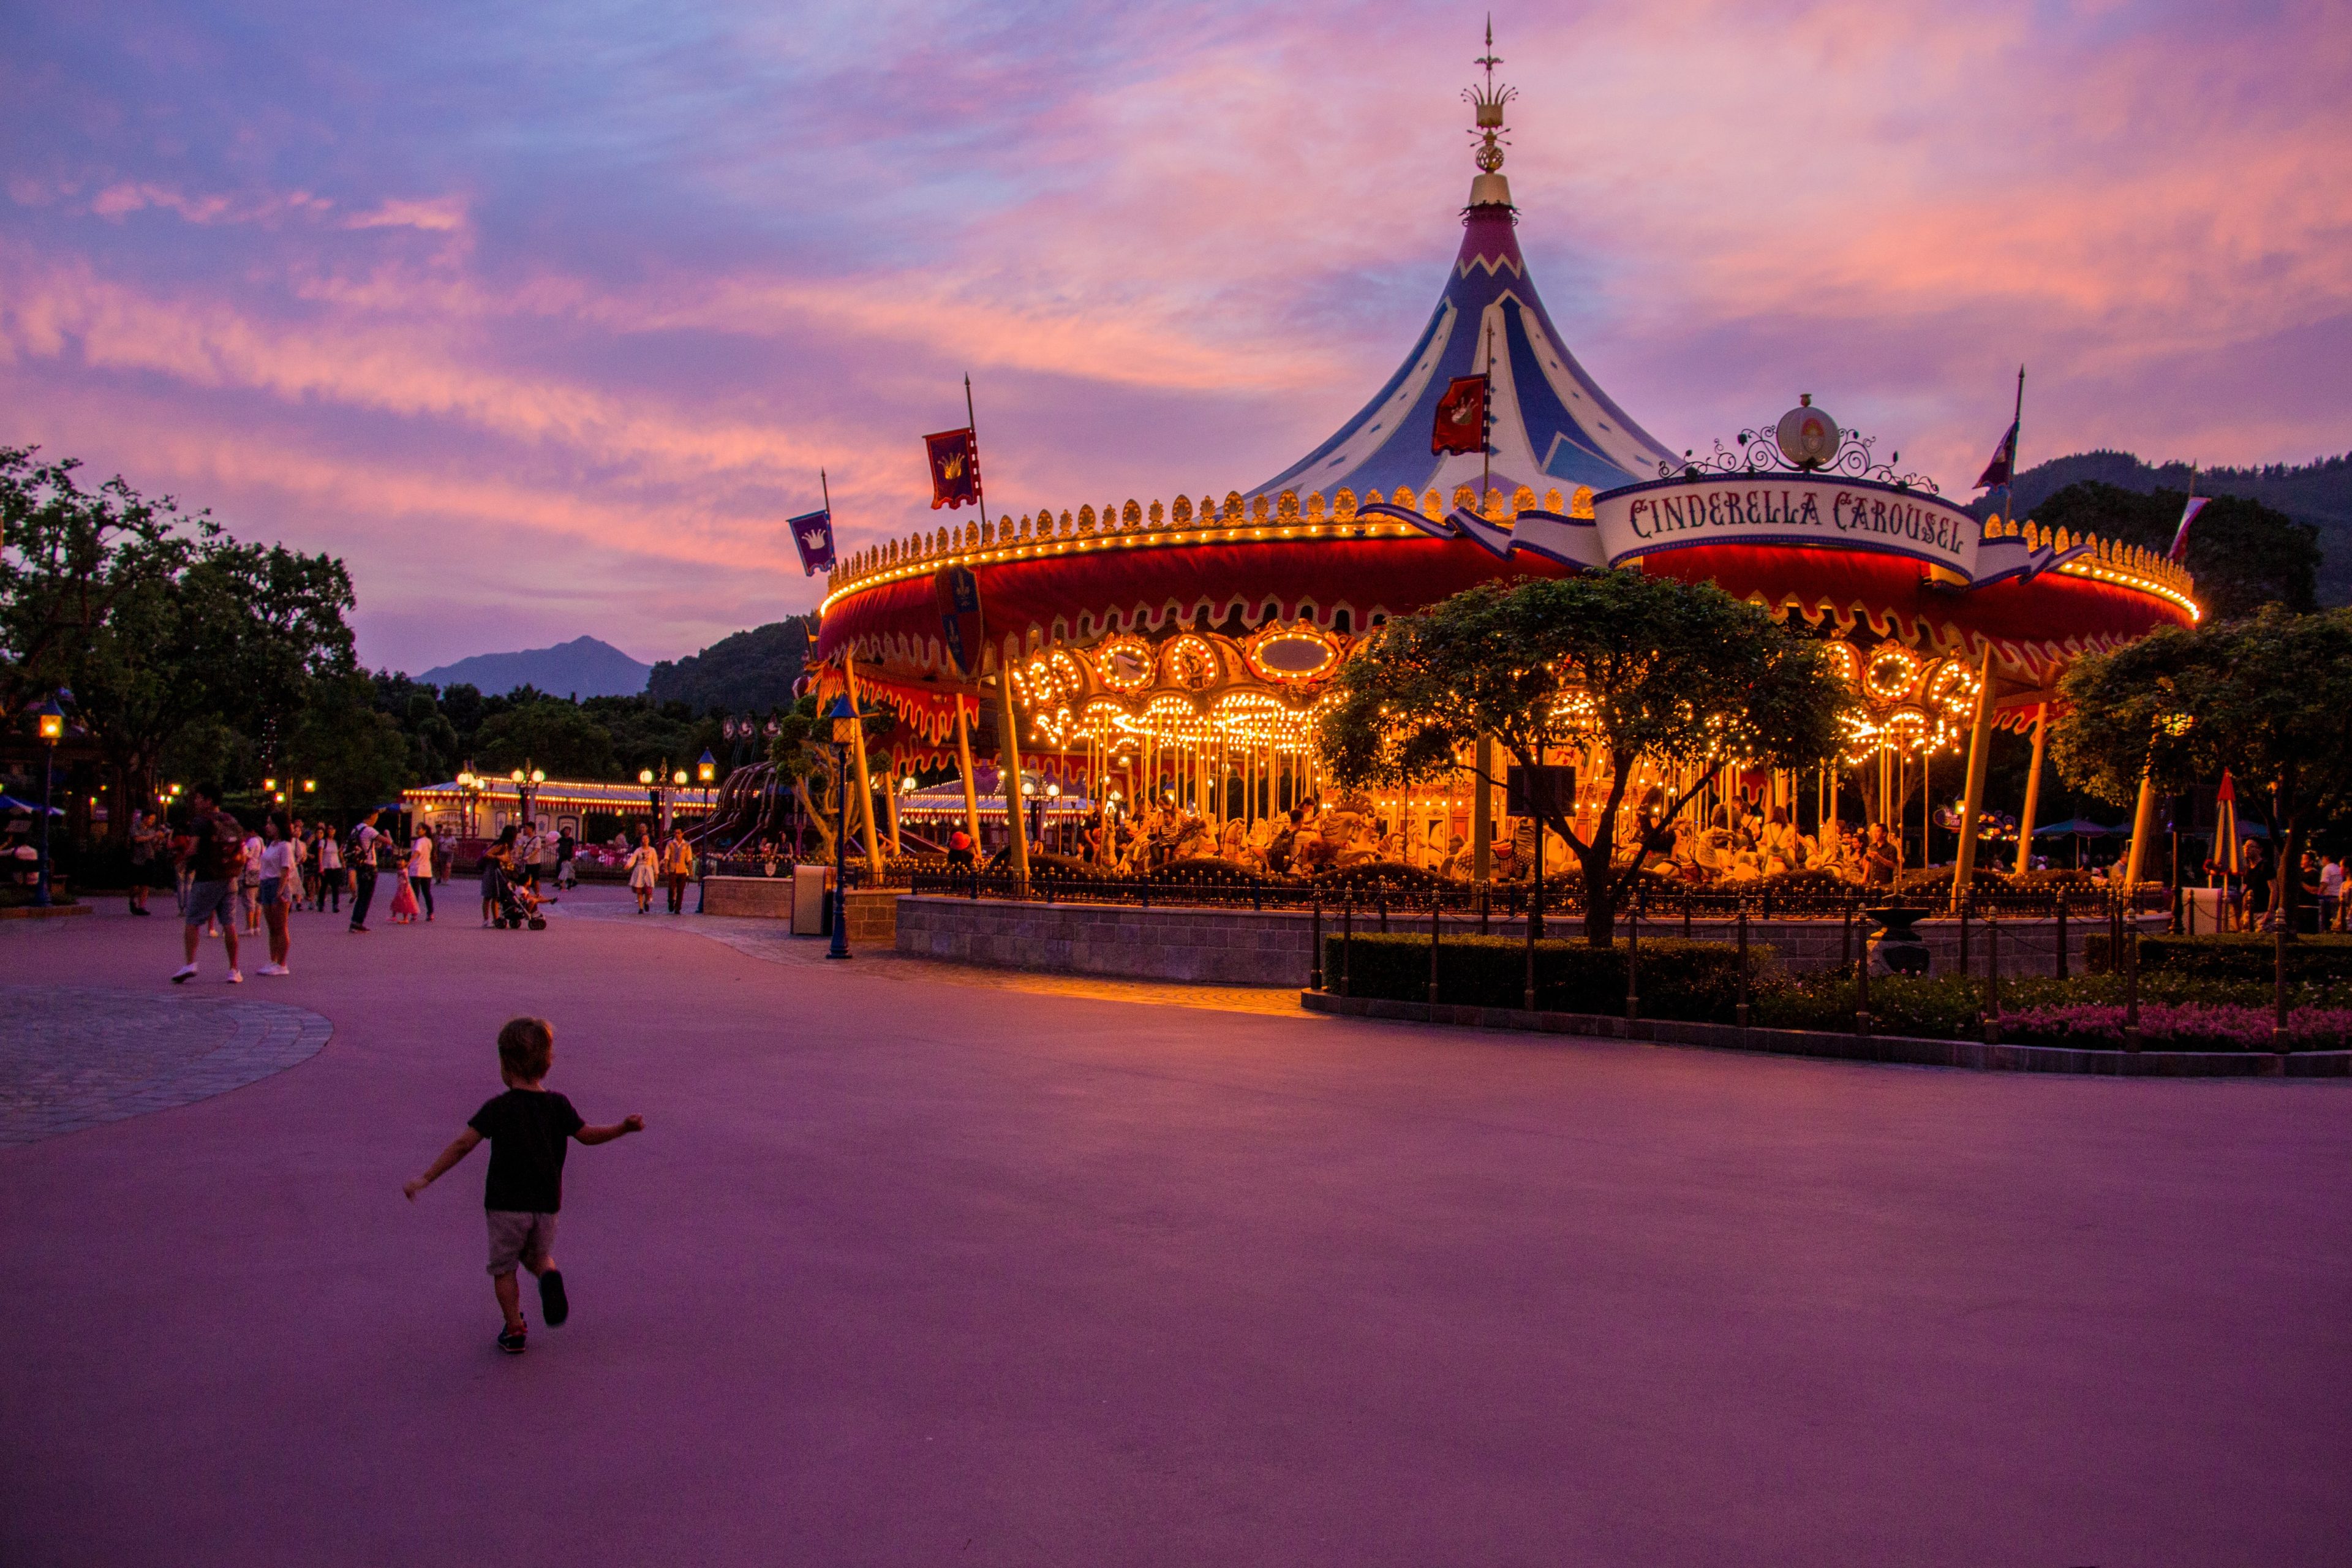 26 How To Build A Carousel Javascript